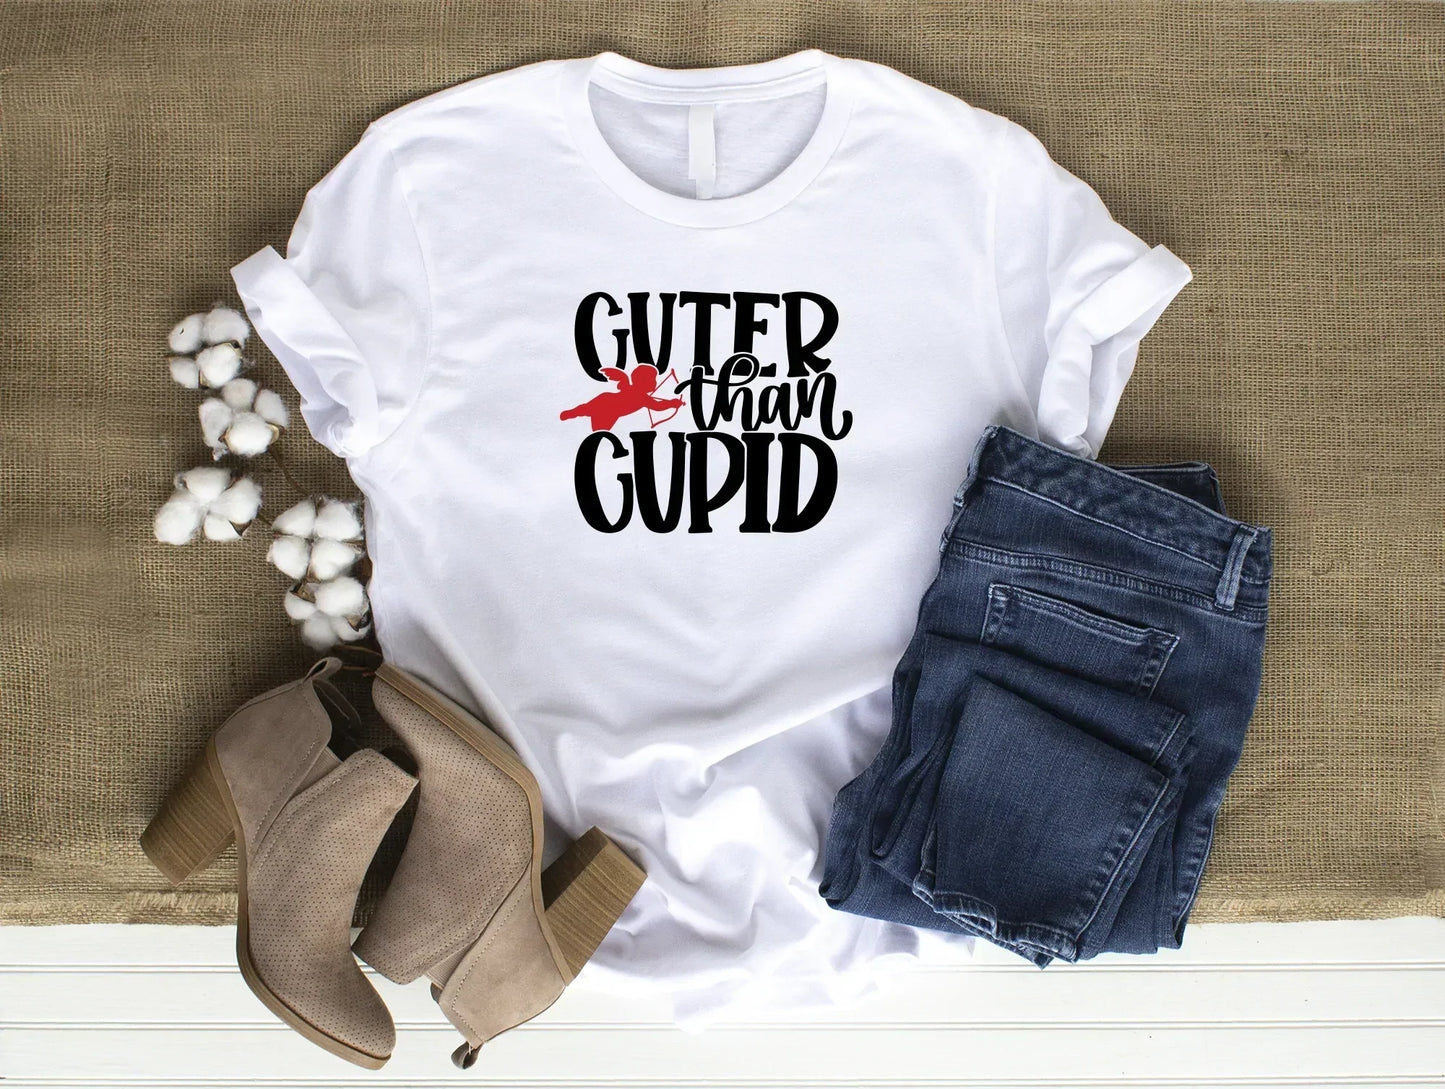 Cuter Than Cupid Cute Comfy Valentine's Day White T-Shirt Size 3XL